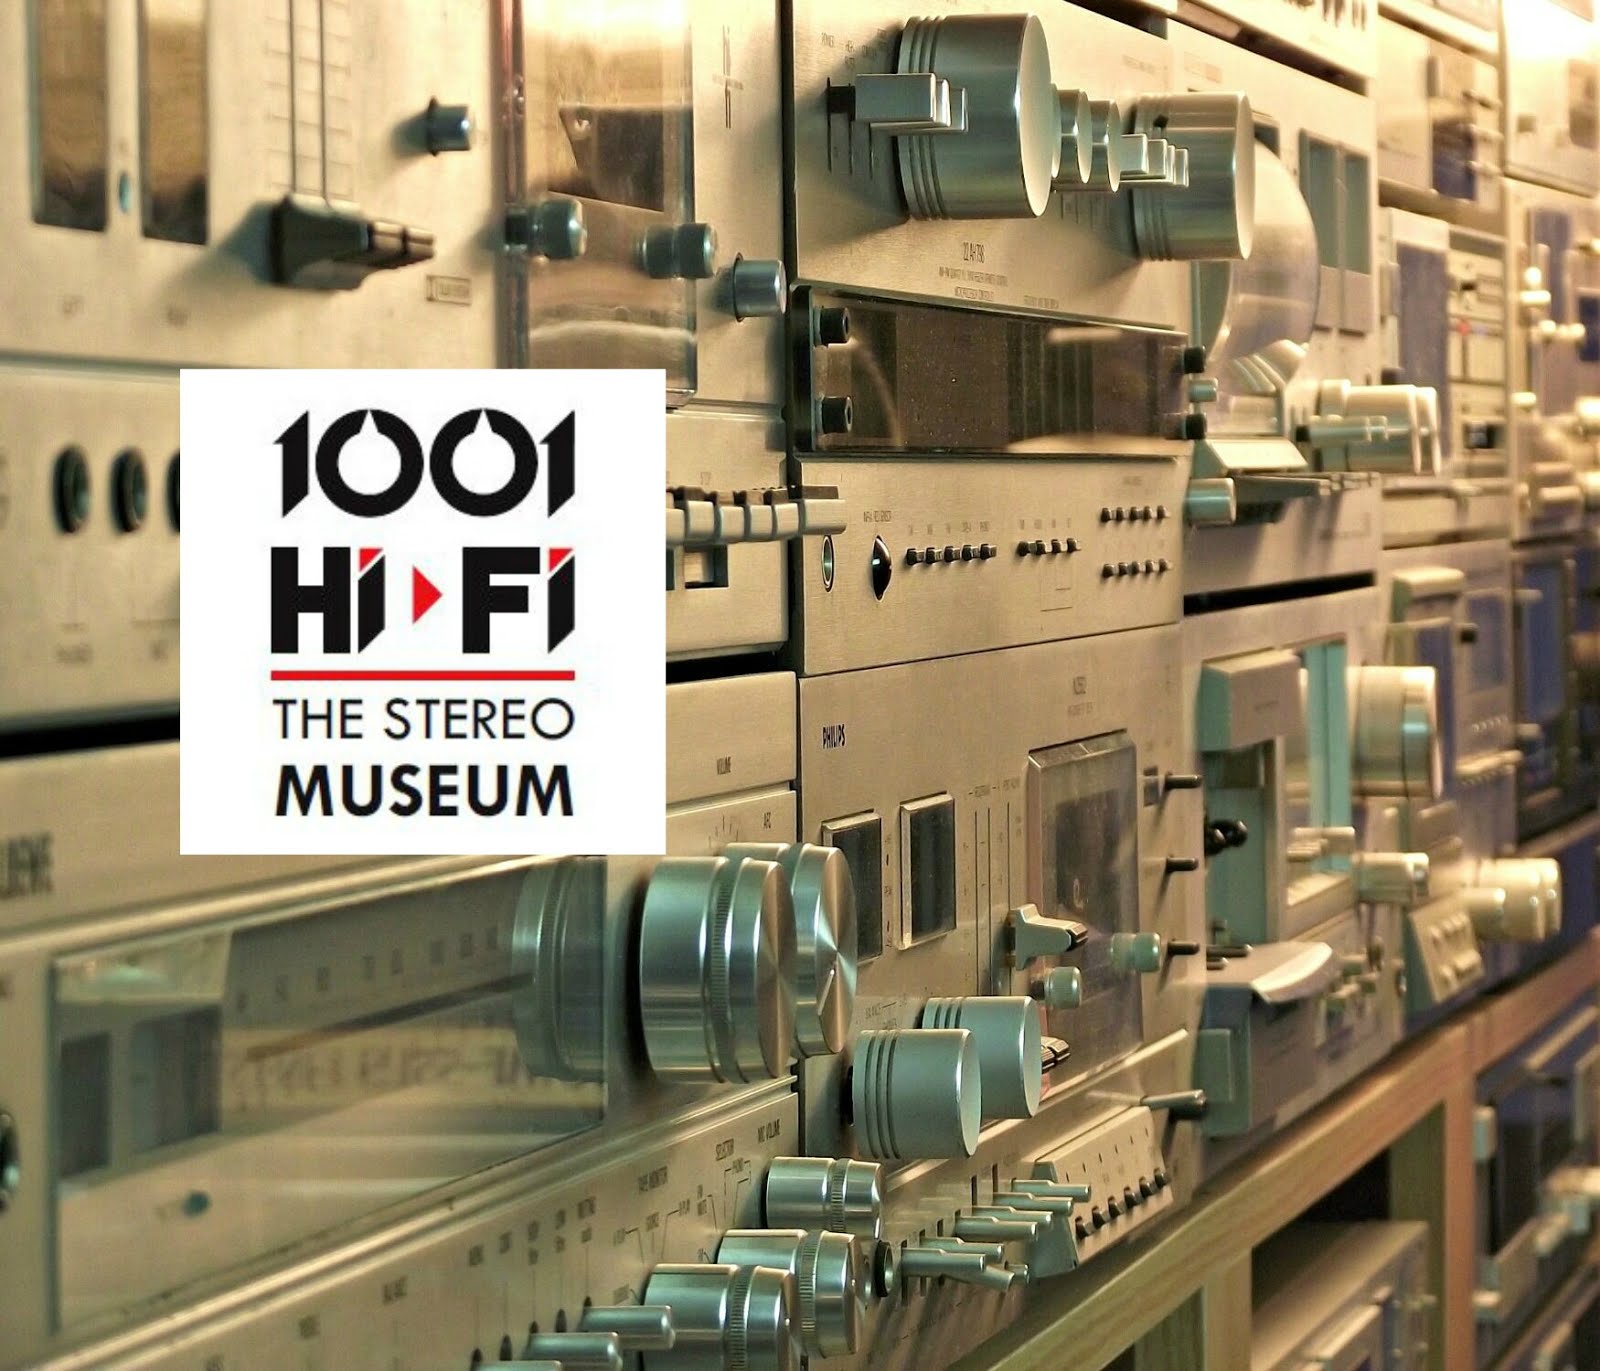 The Stereo Museum